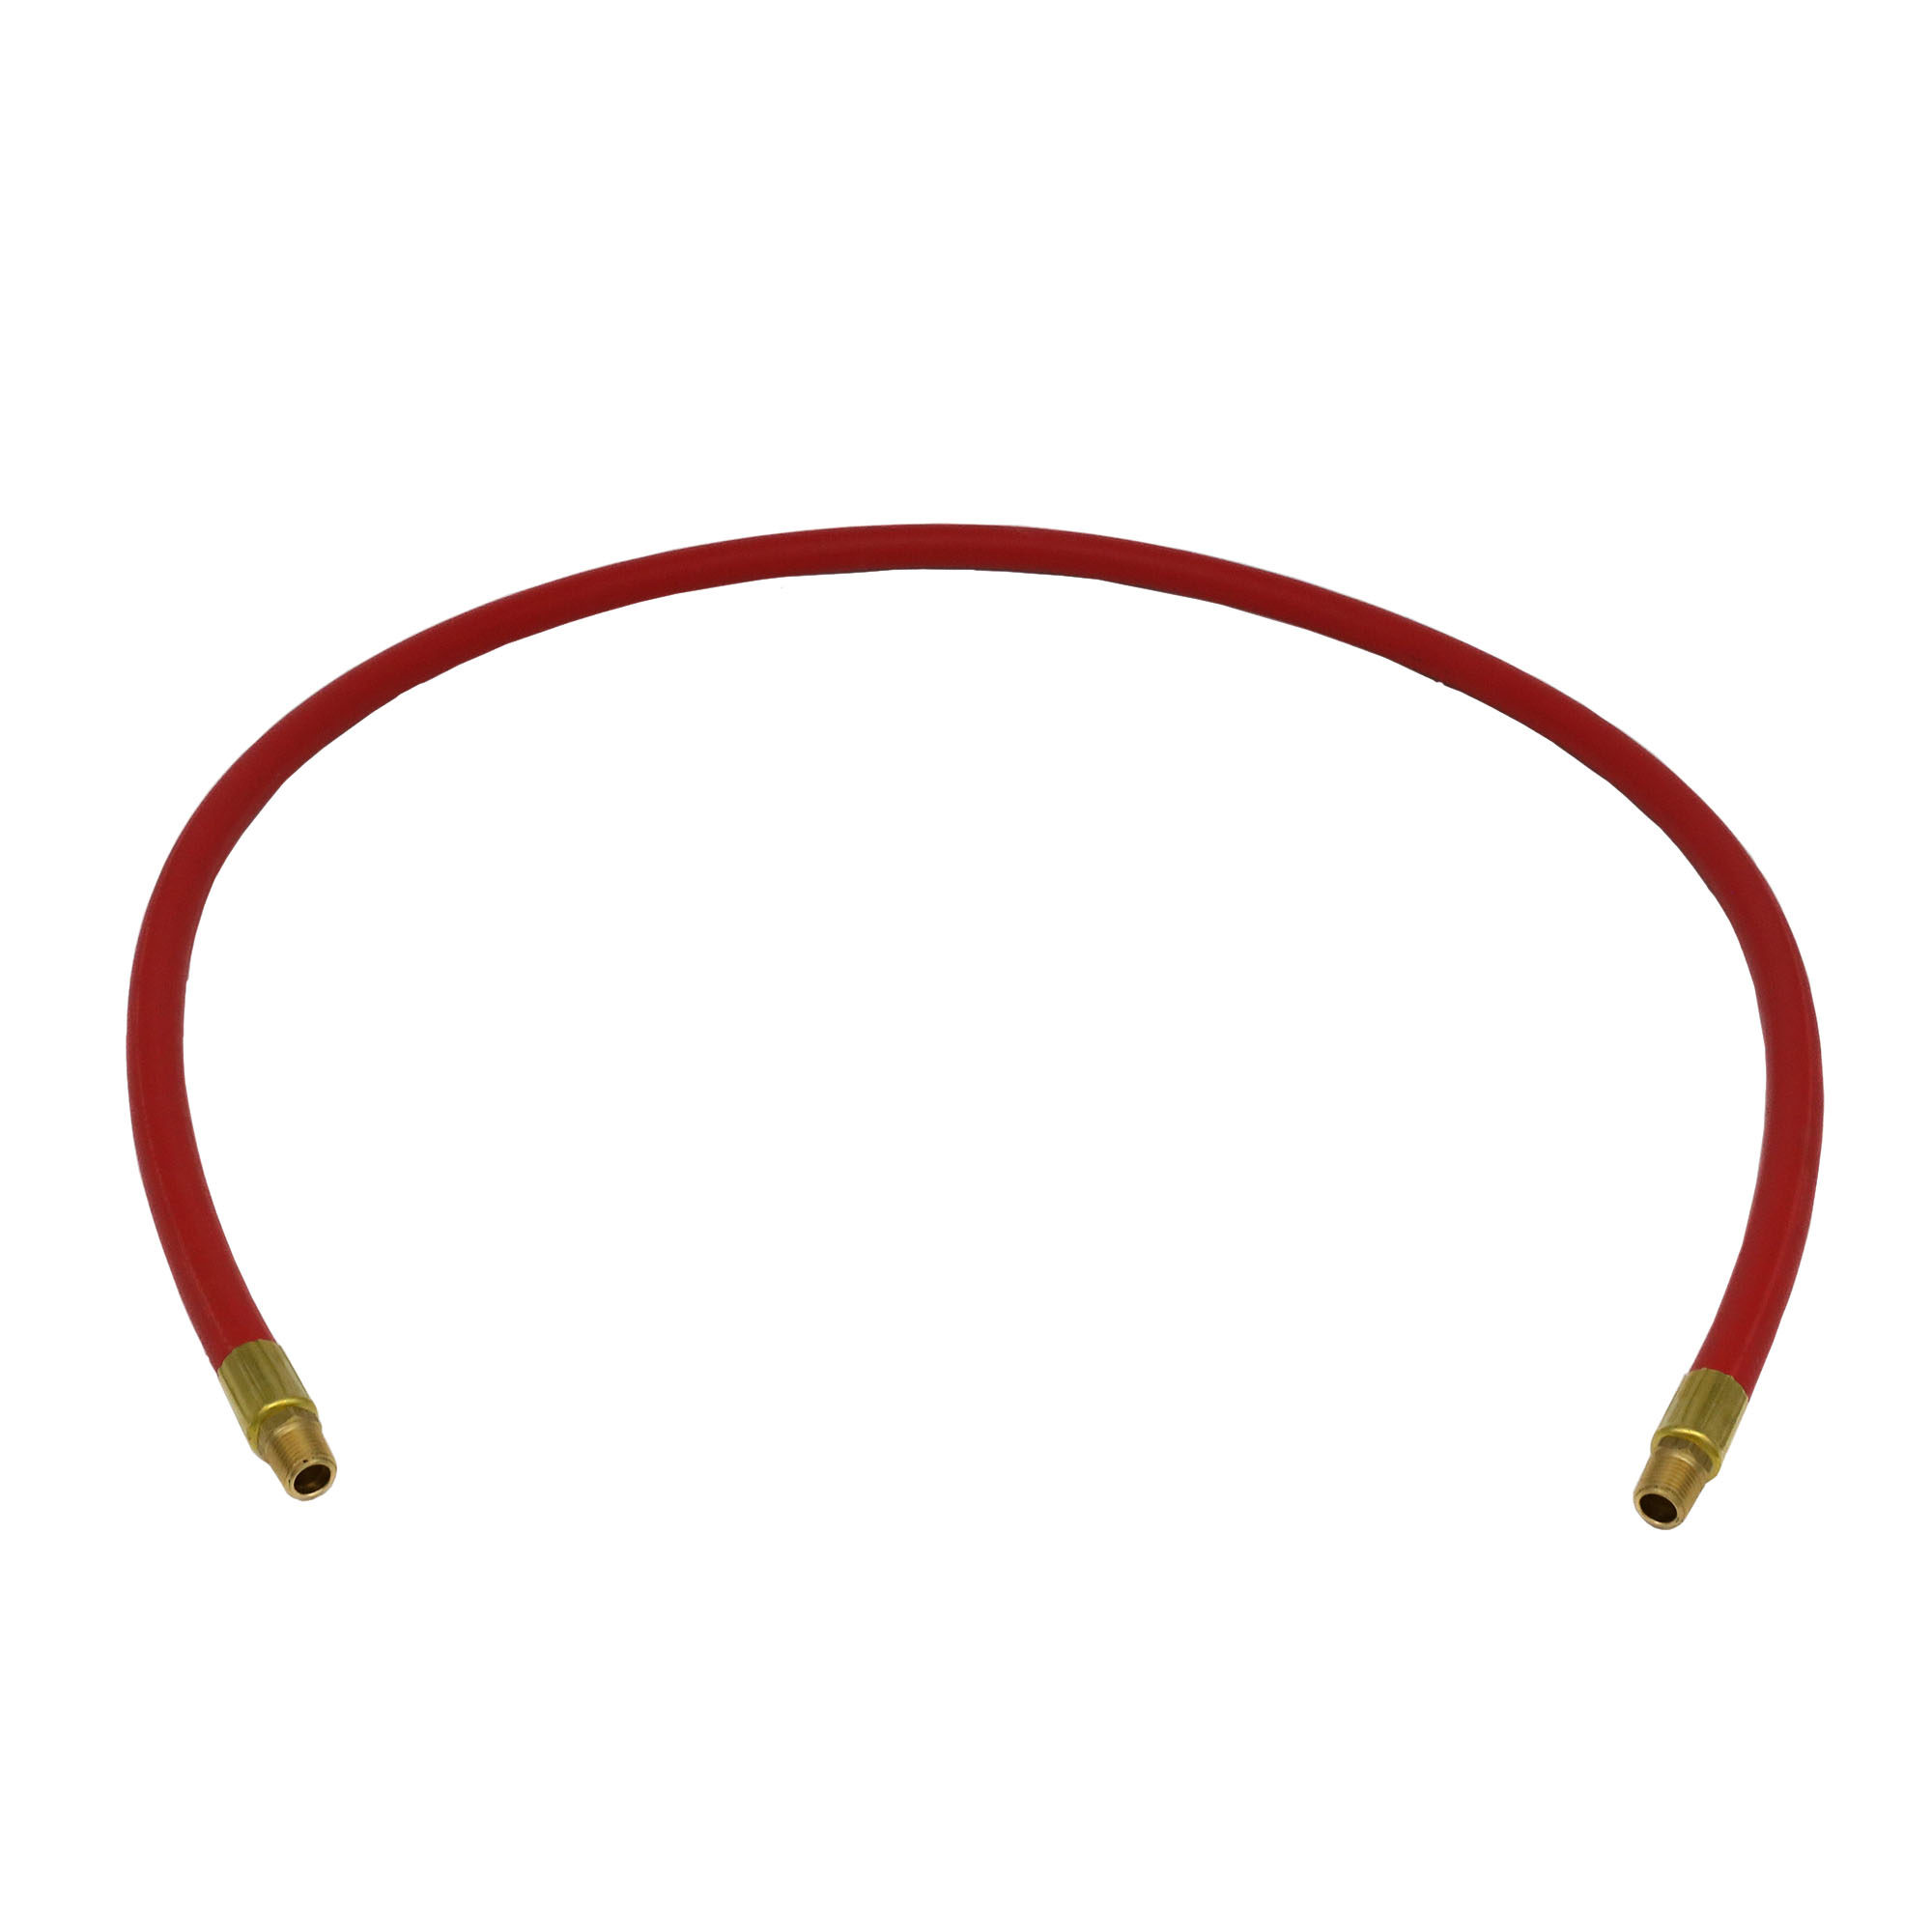 Cabinet Sandblaster Parts, Parts & Accessories, 43" Hose Assembly, 152 Hose Assembly, American Hawk Industrial, Dee-Blast